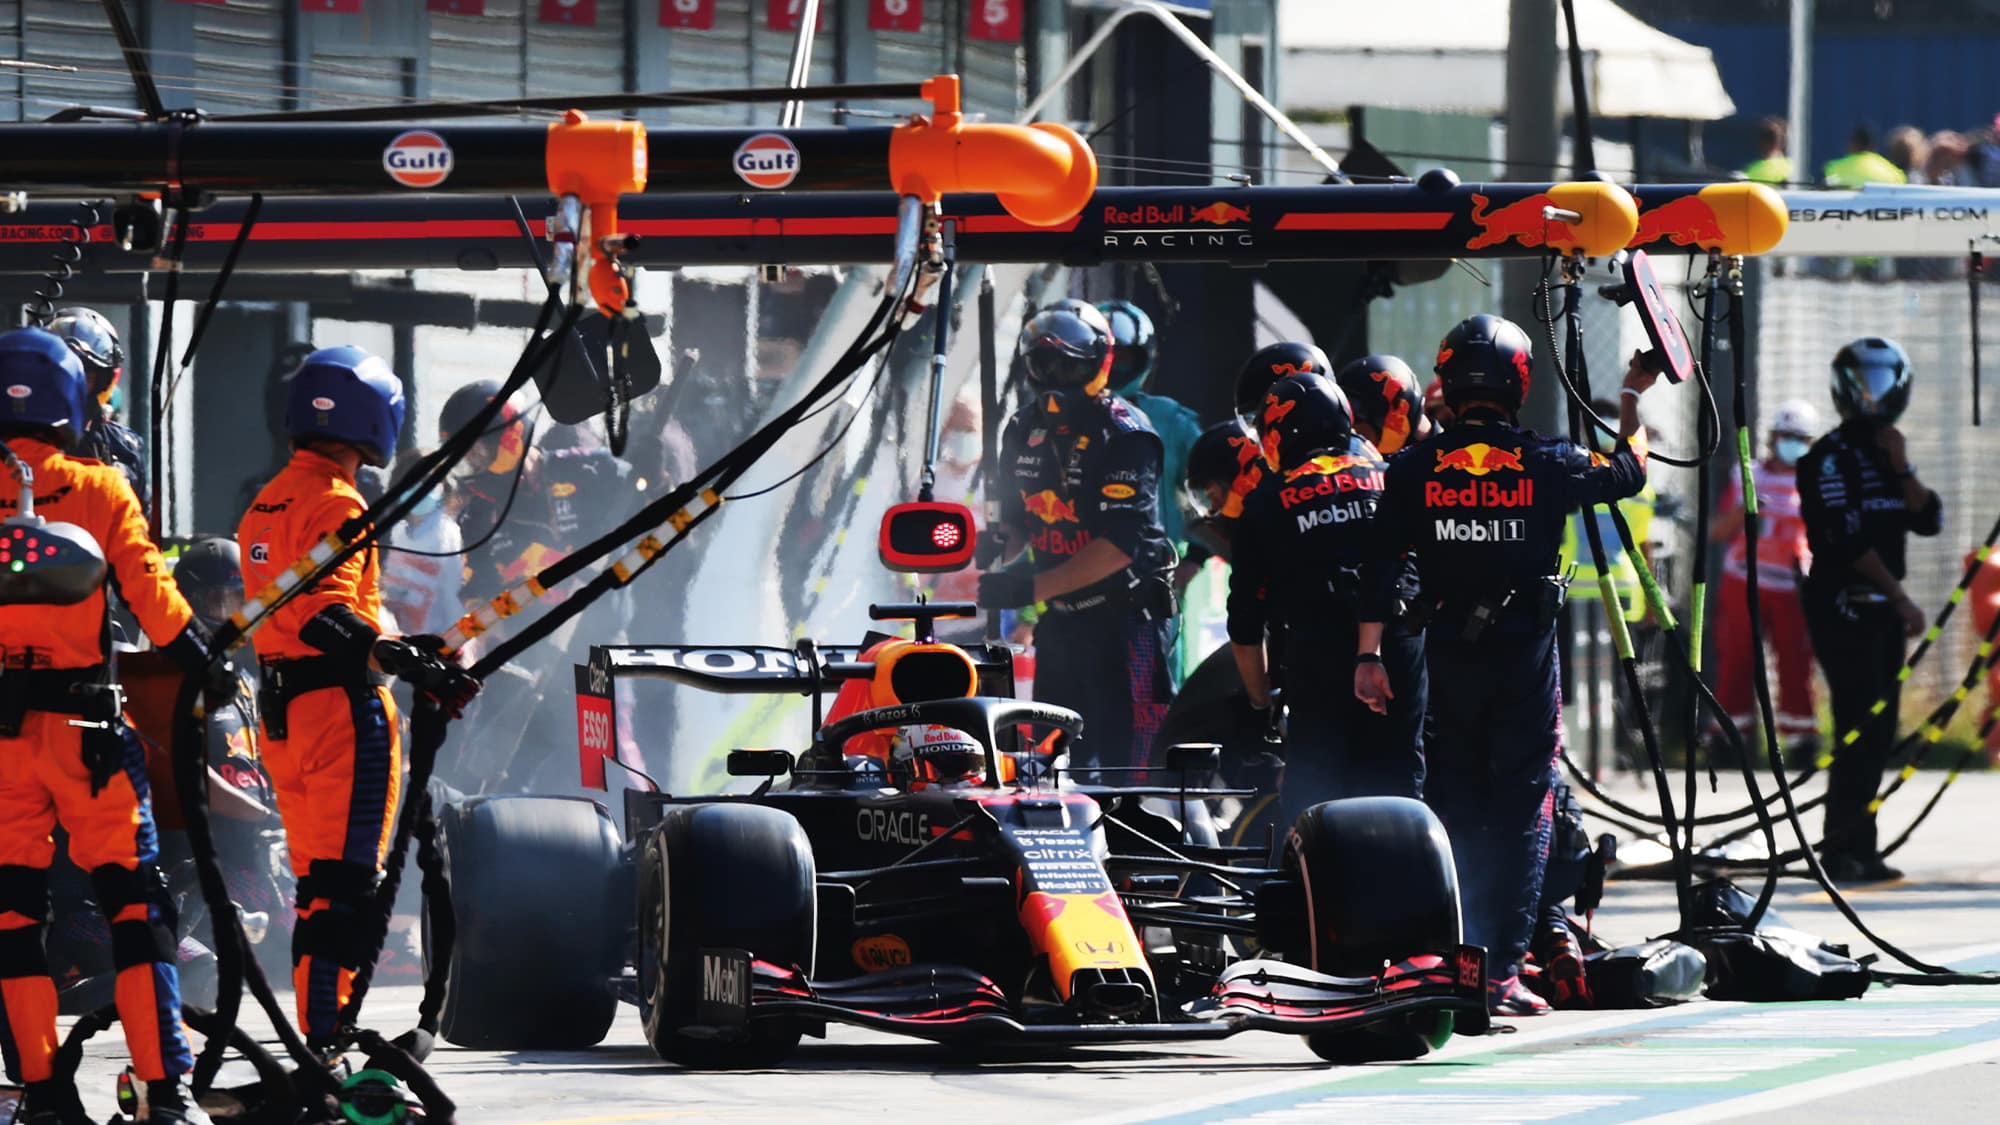 Max Verstappen pulls out of the pits at Monza in 2021